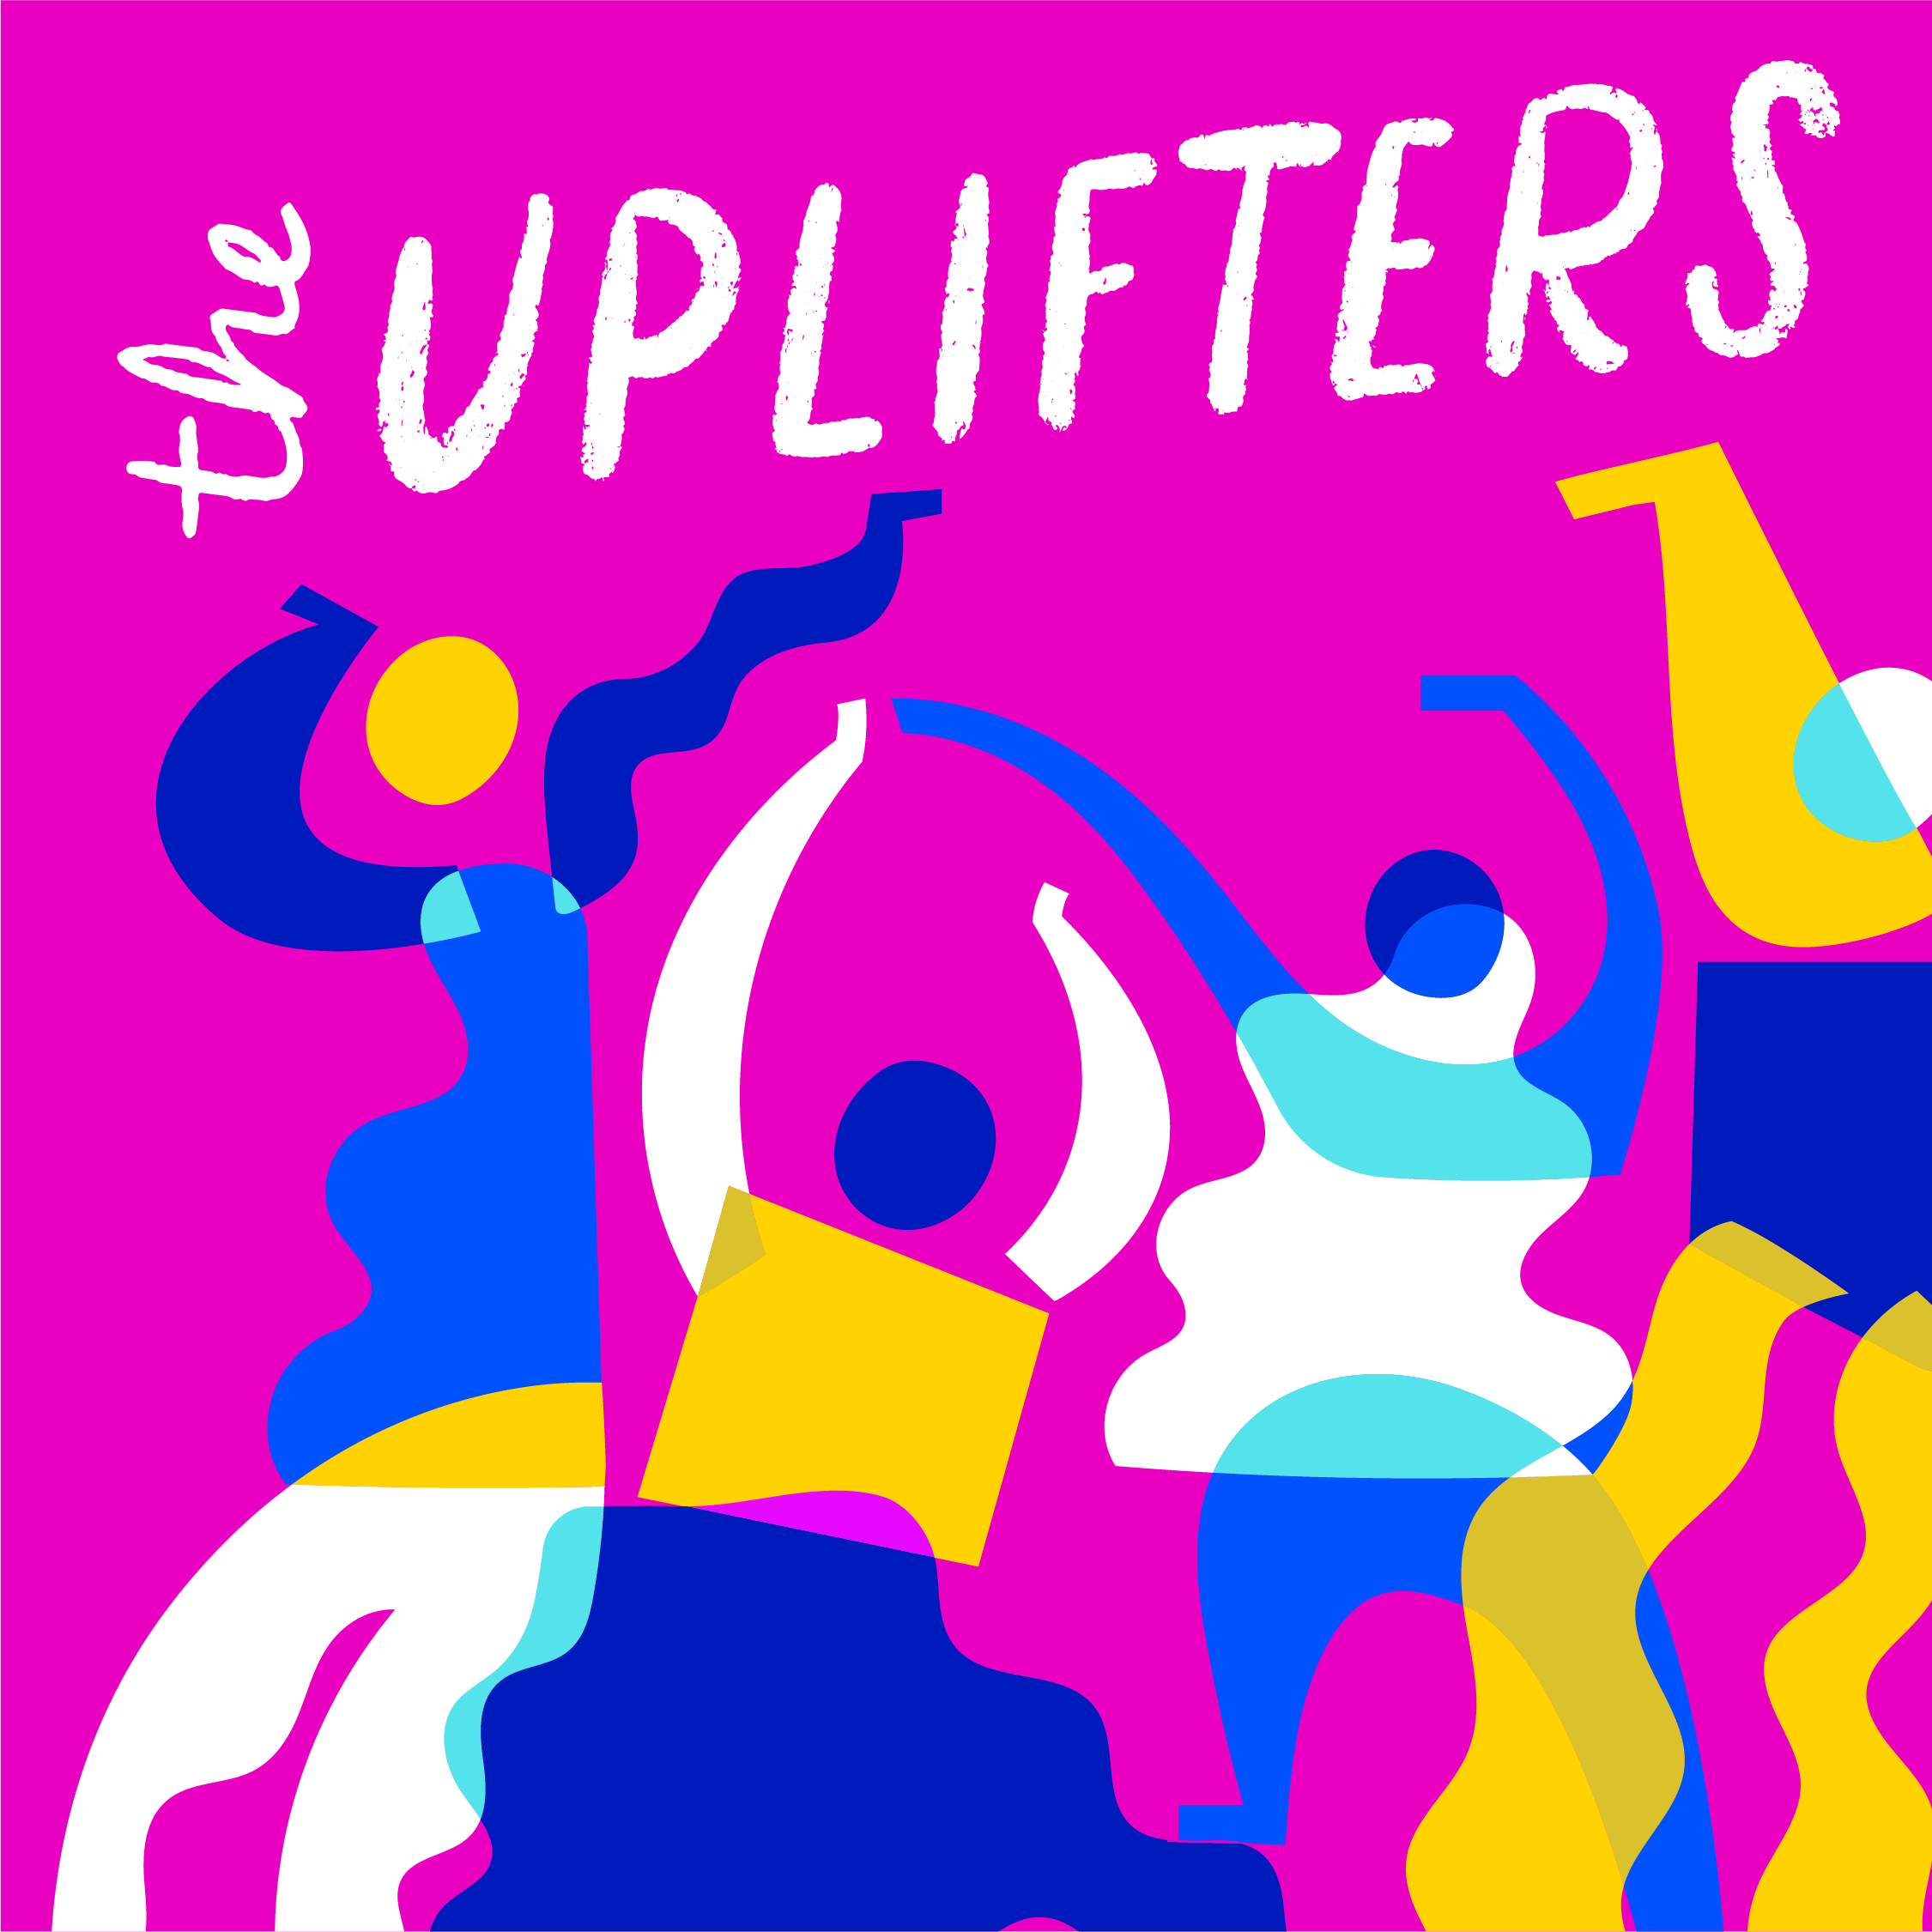 Show artwork for The Uplifters